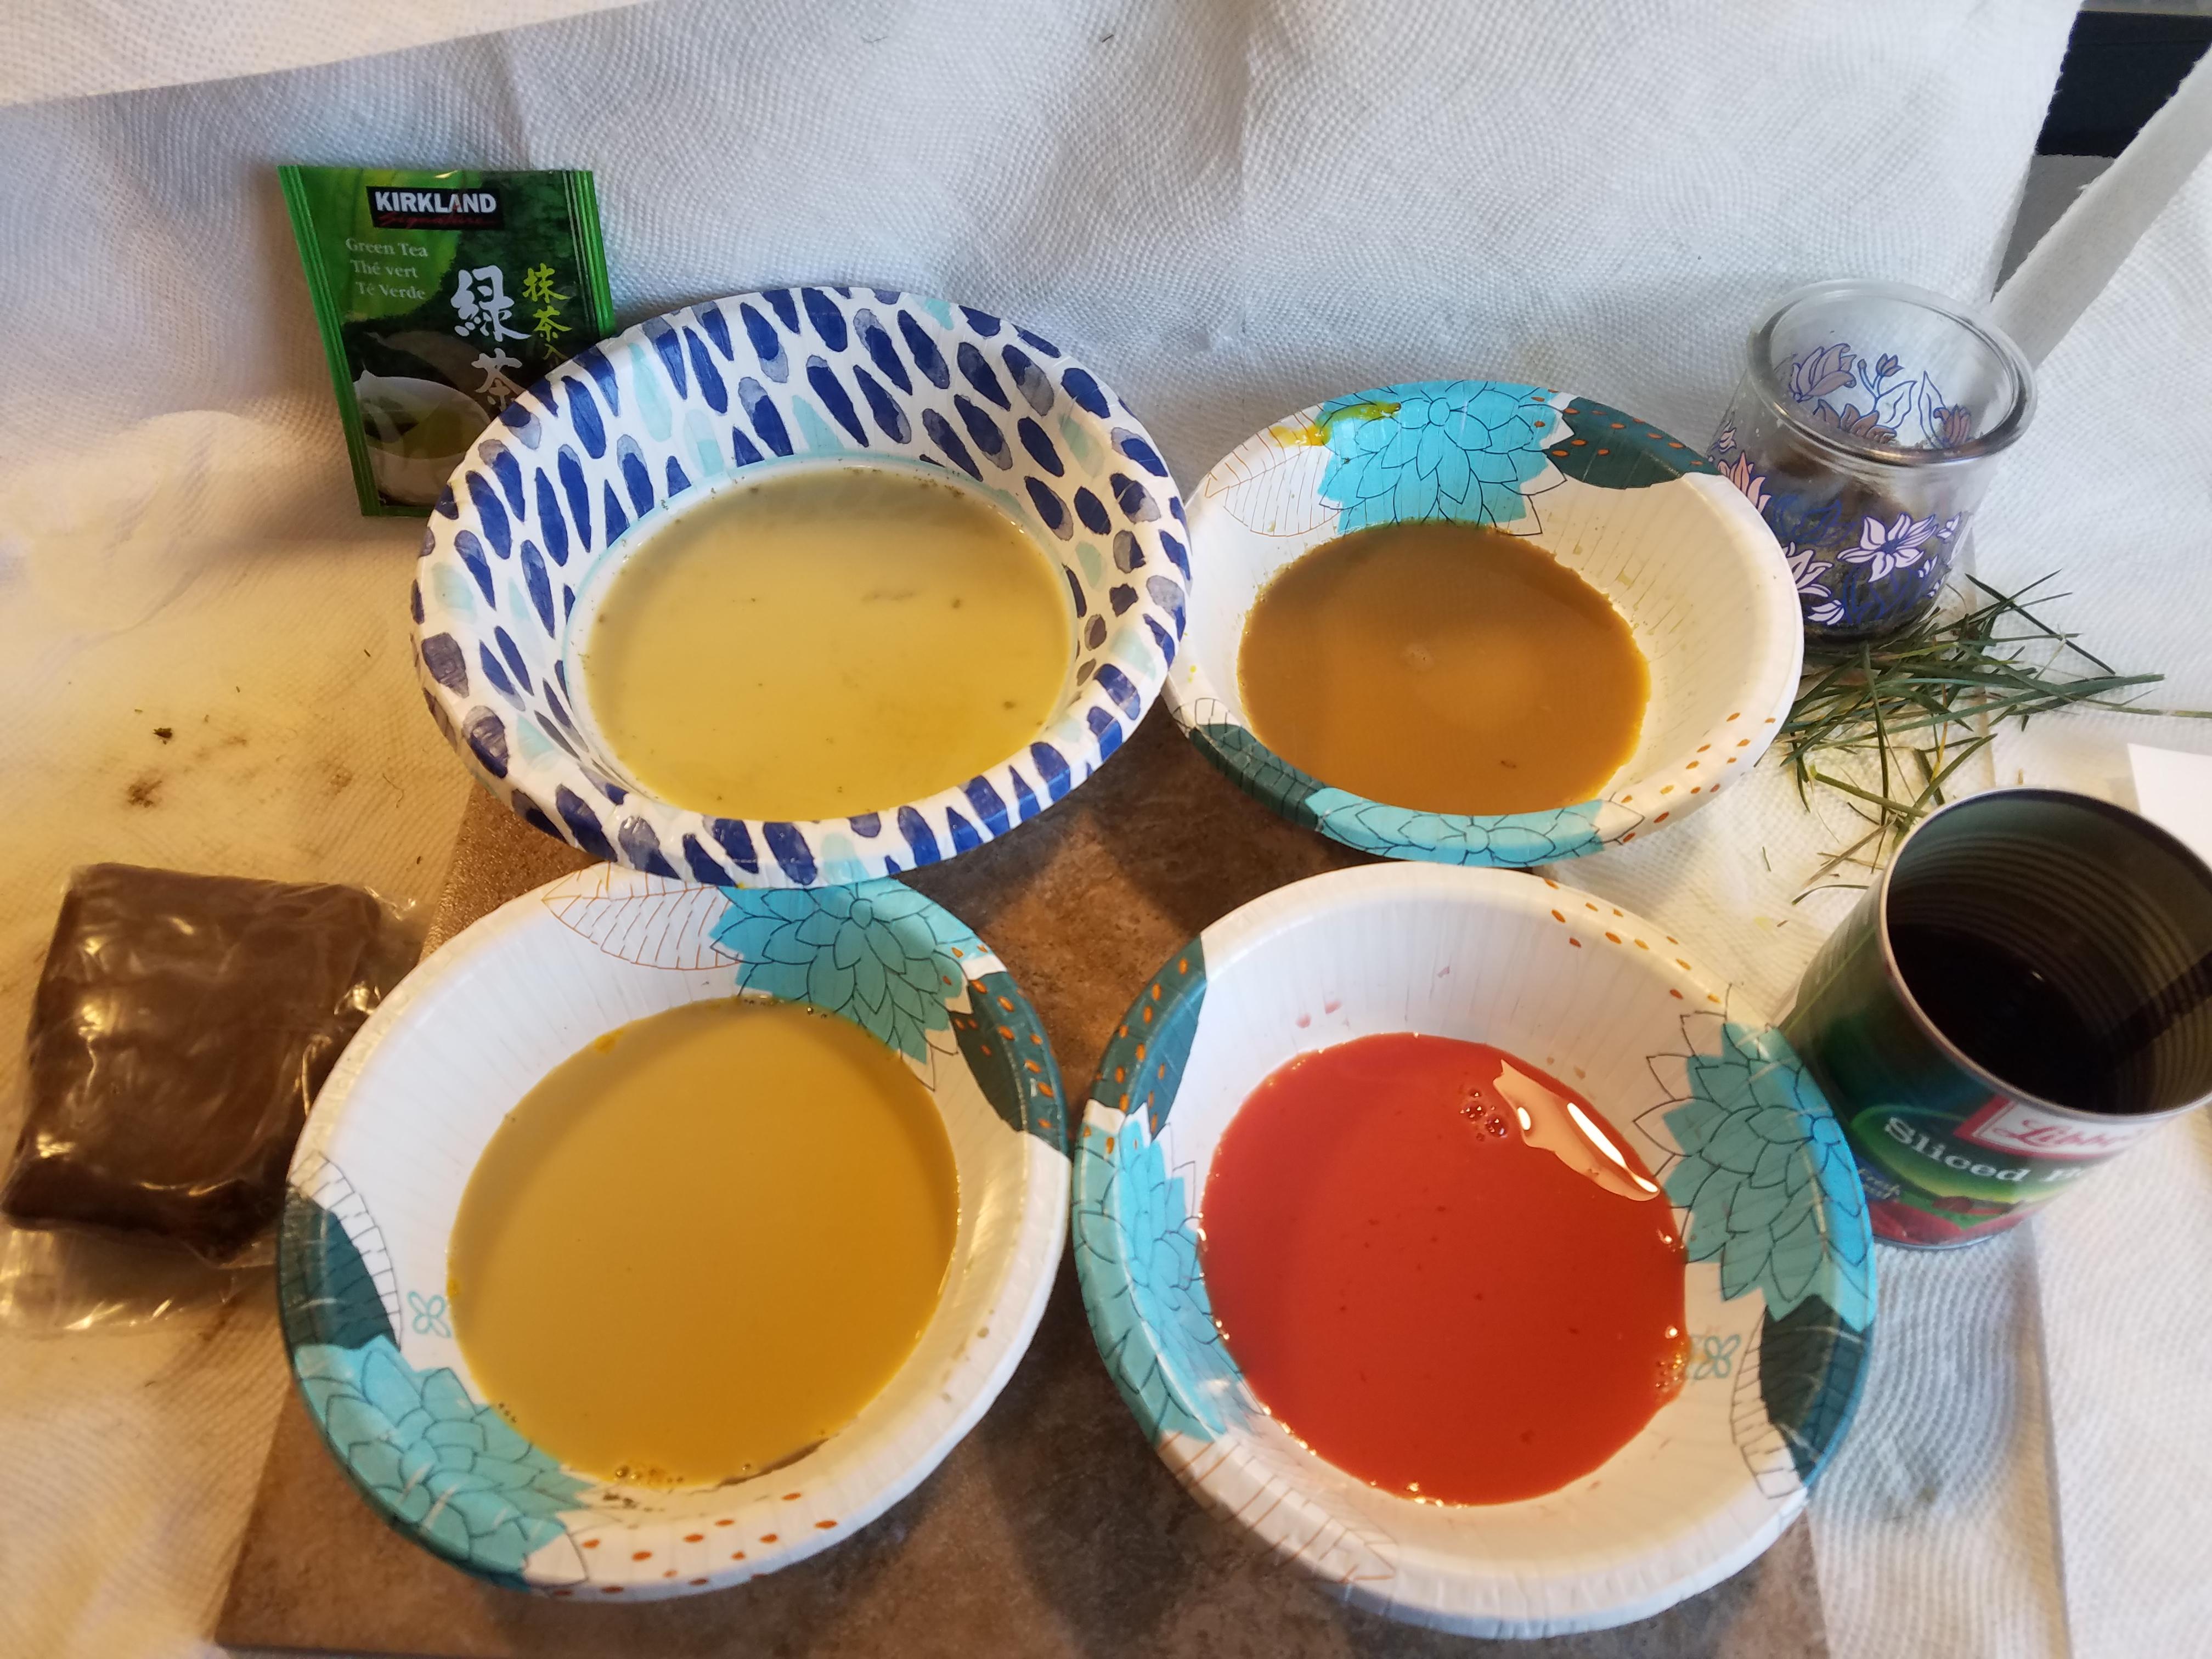 Make Your Own Tempera Paint and Pigments/Dyes! Fast Drying. Historical Style, Traditional Paint & Dyes From Egg and Naturally Extracted Colors.